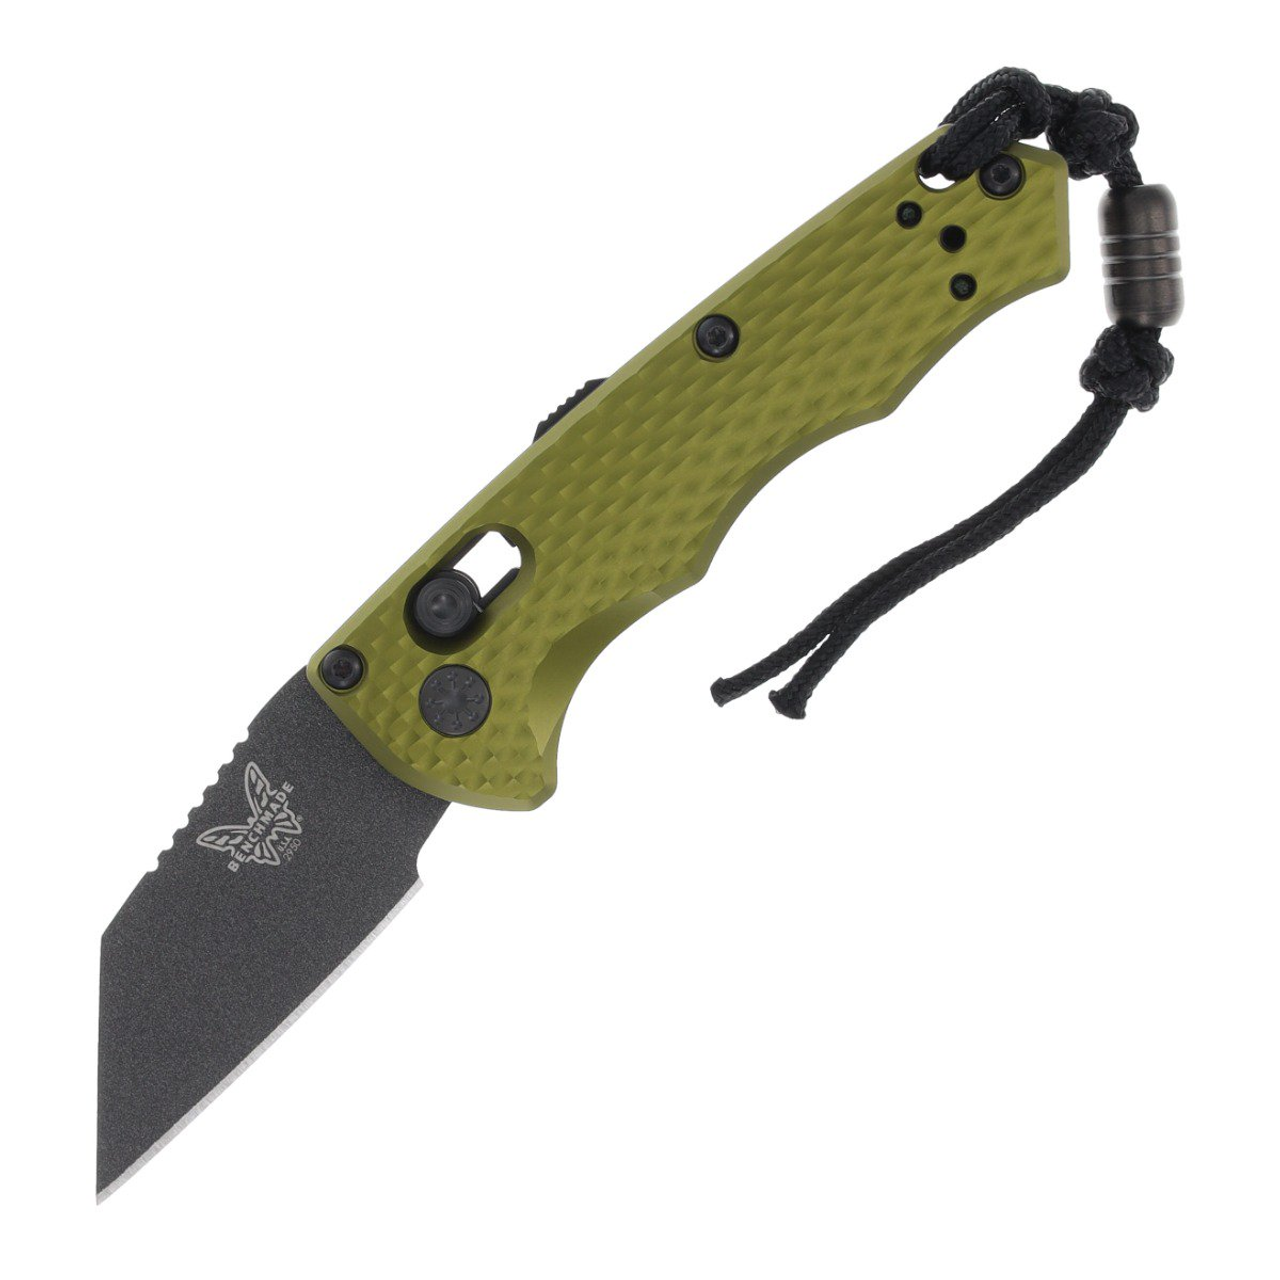 product image for Benchmade Immunity 2950BK-2 Woodland Green CPM-M4 Blade AXIS Lock Automatic Knife